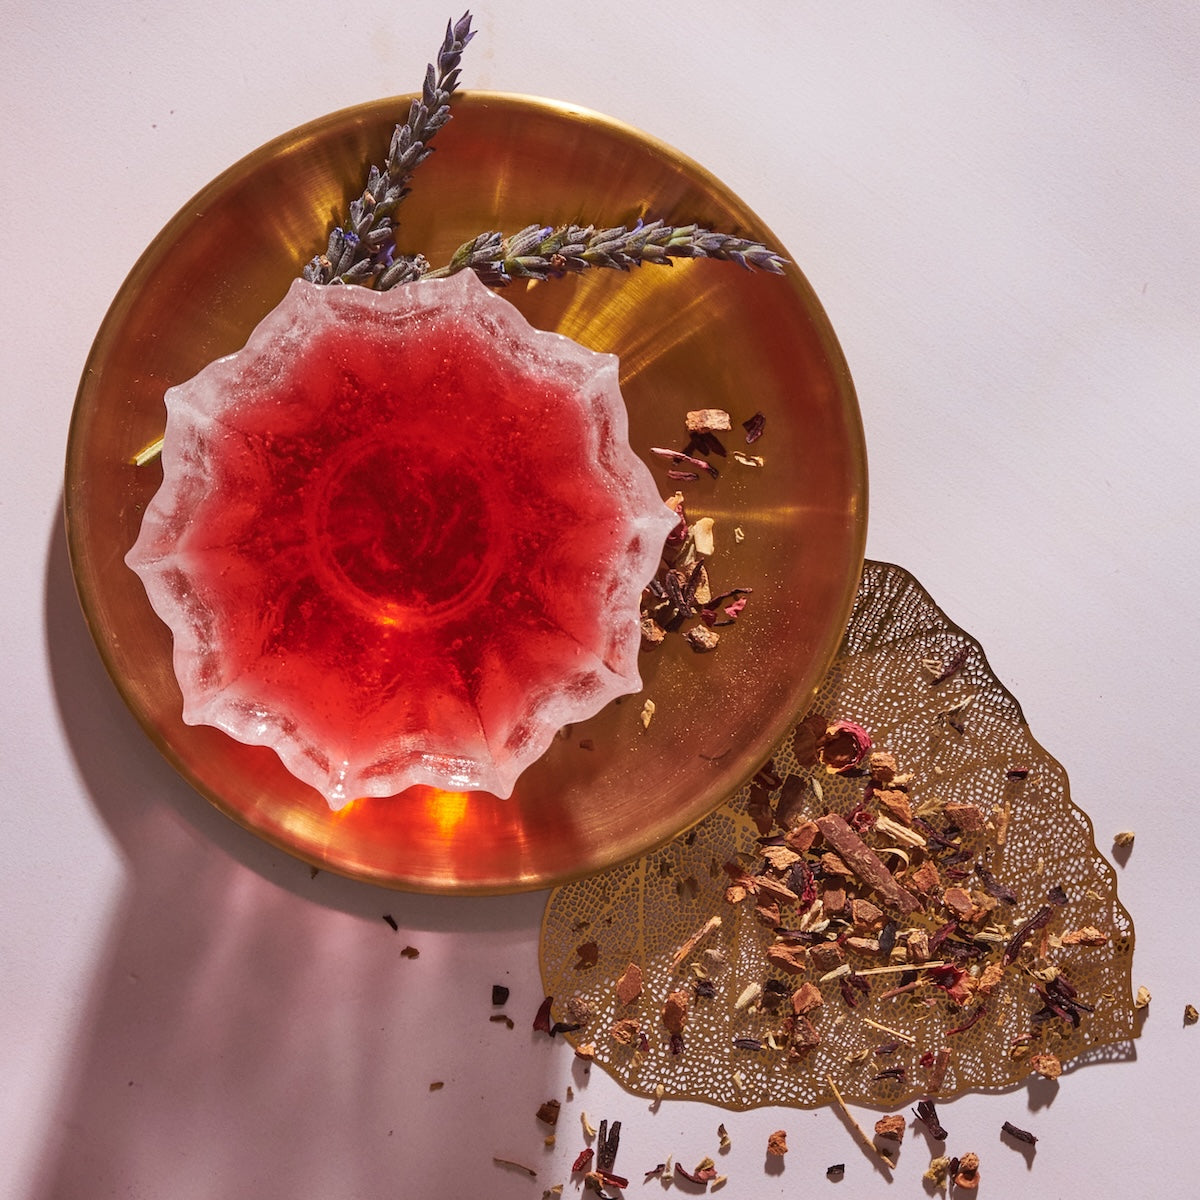 A red drink in a clear, decorative glass sits on a golden plate. The drink, infused with Magic Hour's The Lovers, is garnished with sprigs of lavender. Next to the plate are scattered pieces of dried herbs and a gold, lace-like leaf. The background is a light, neutral color.